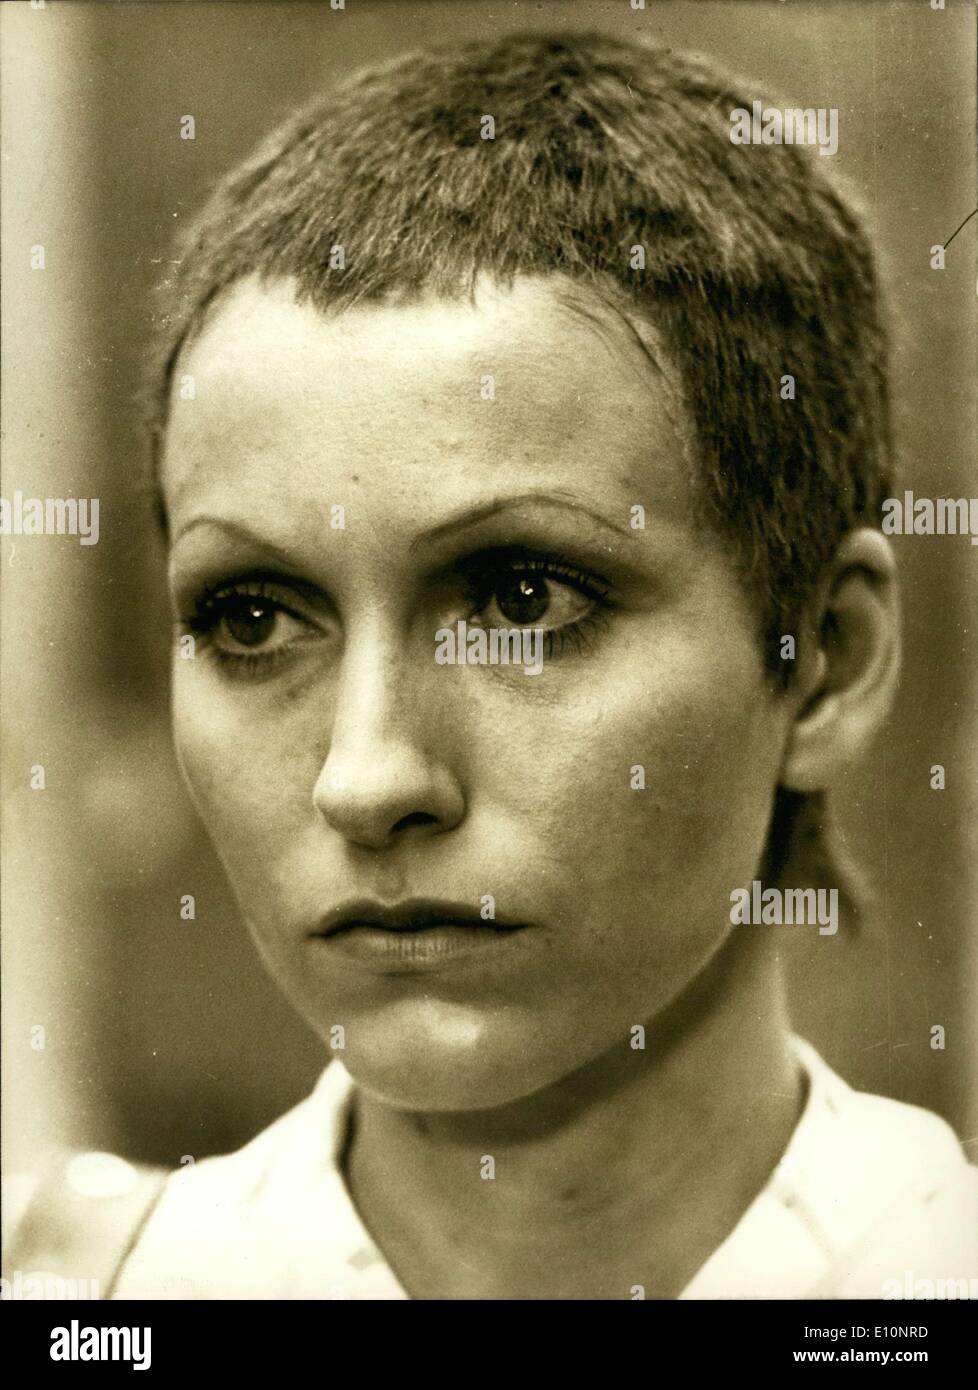 Aug. 29, 1973 - In order to film ''The Irony of Destiny'' by Edouard Molinaro, Juliette Mills had to cut her hair. Here is a picture of her new do. Stock Photo